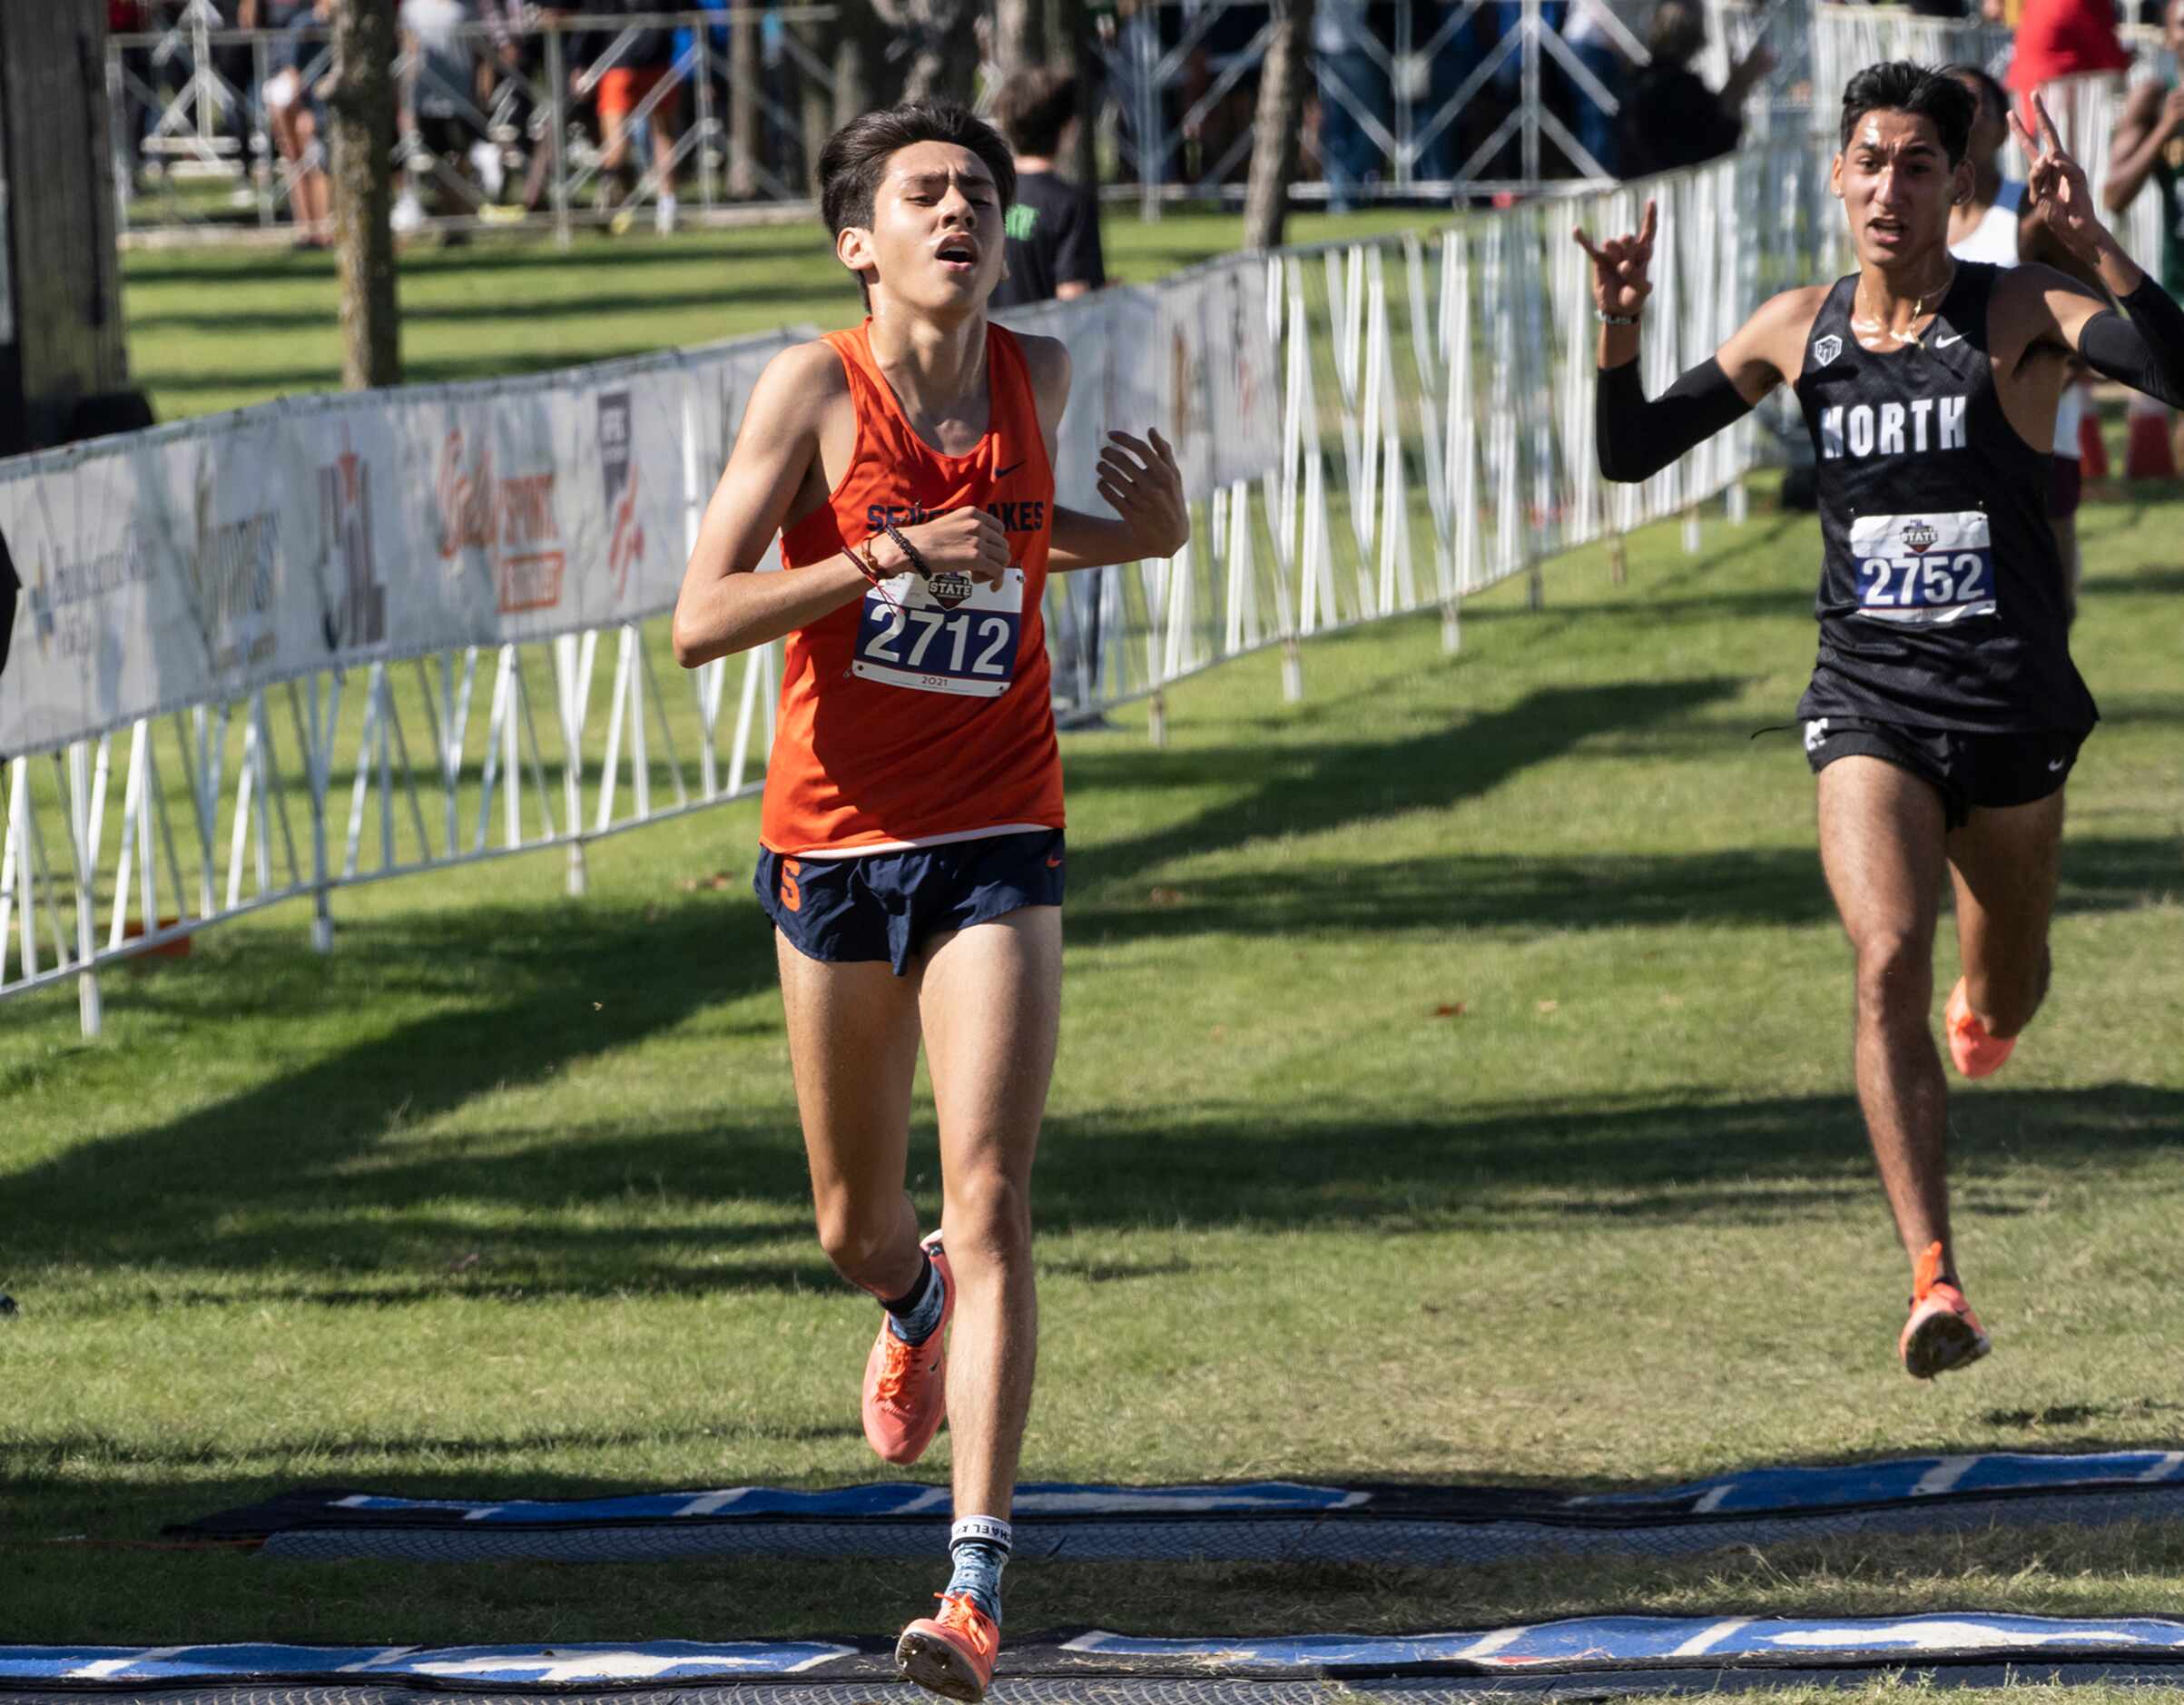 Katy Seven Lakes Ruben Rojas, (2712), finishes in third place ahead of PSJA North Hector...